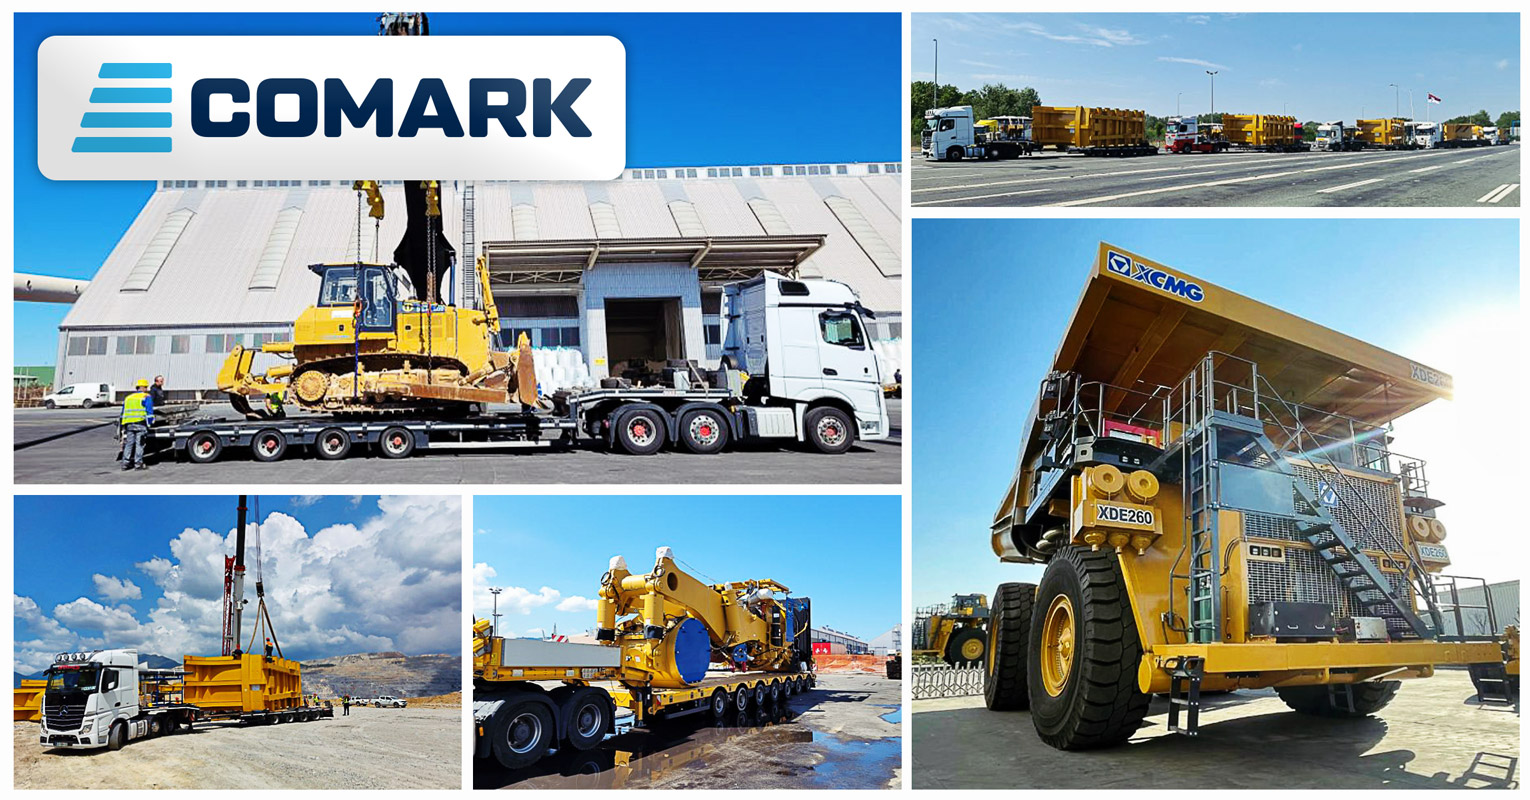 Comark has a New Office in Beograd, Serbia where they Recently Delivered New Disassembled Mining Dump Trucks